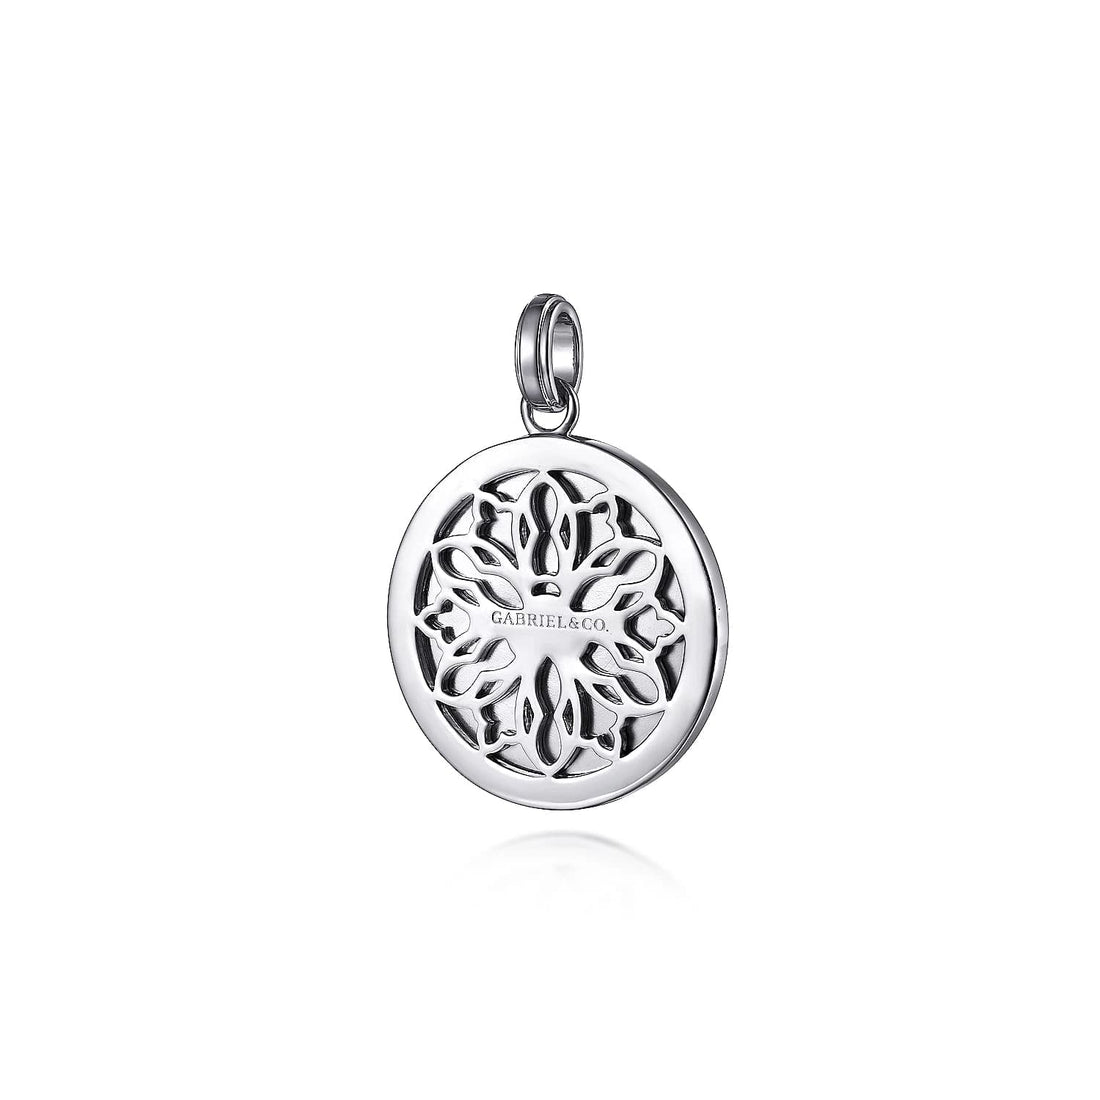 Gabriel & Co. 925 Sterling Silver Compass Pendant with Black Spinel - Skeie's Jewelers